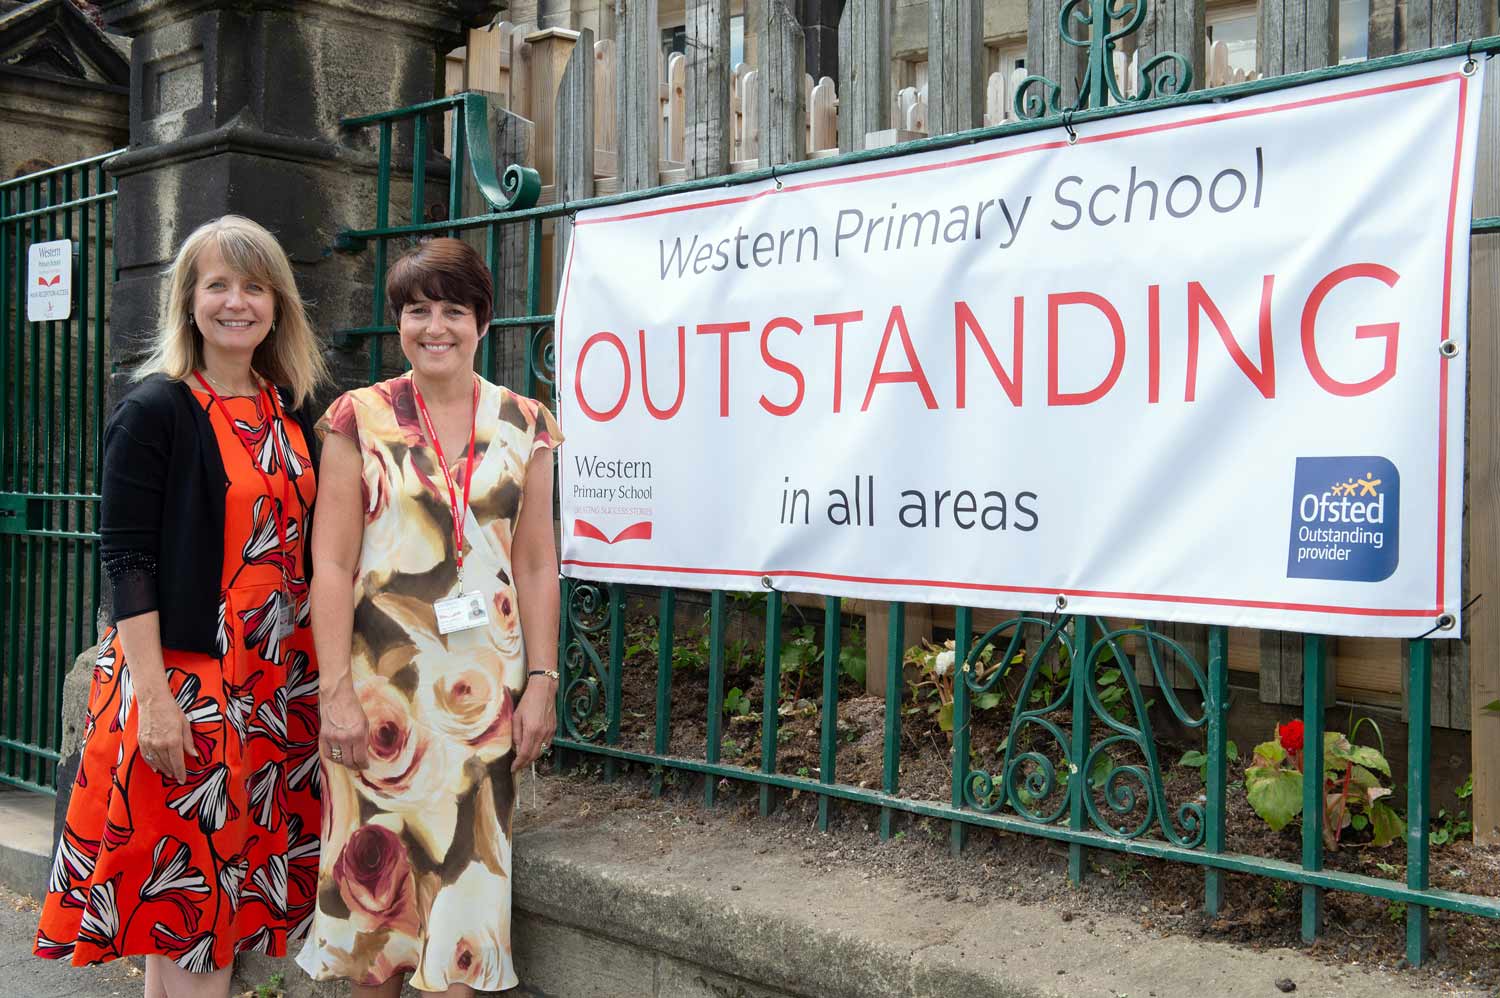 Jayne Sorrell, Chair of Governors and Cheryl Smith, Headteacher standing in front of Western Primary School